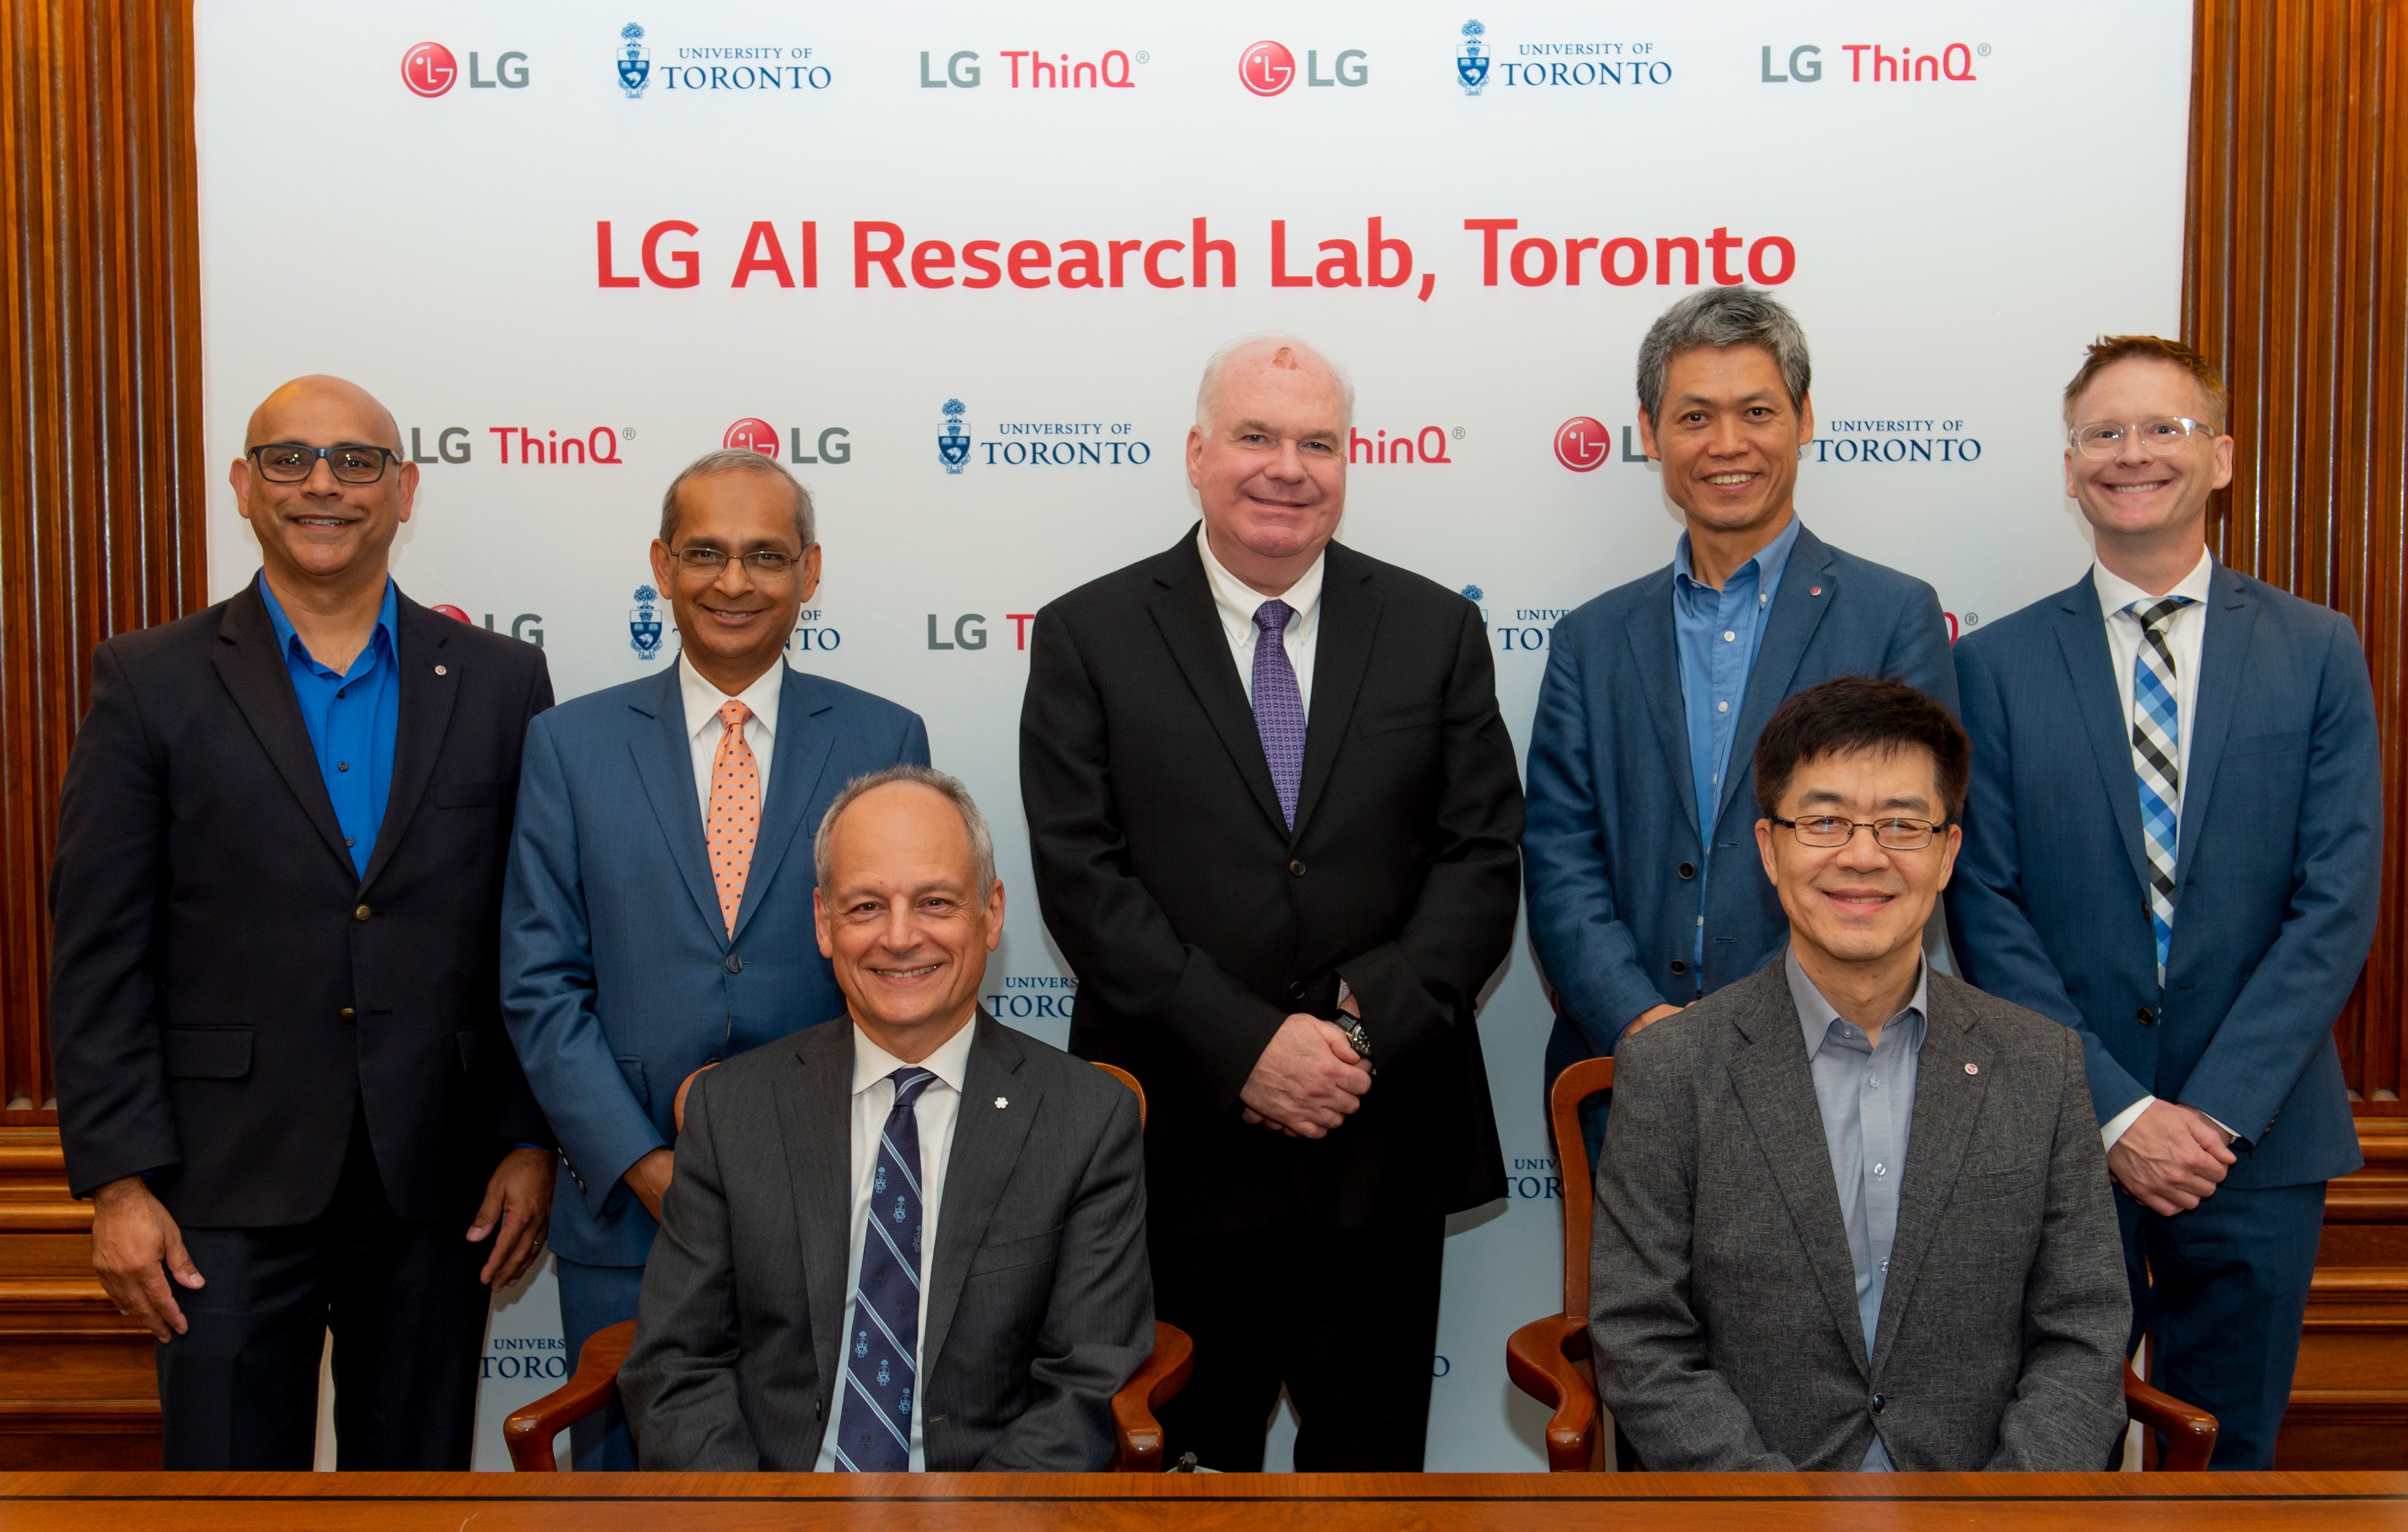 LG Electronics president and chief technology officer, Dr. I.P. Park, and University of Toronto president Meric Gertler, pose with delegates for a group picture.